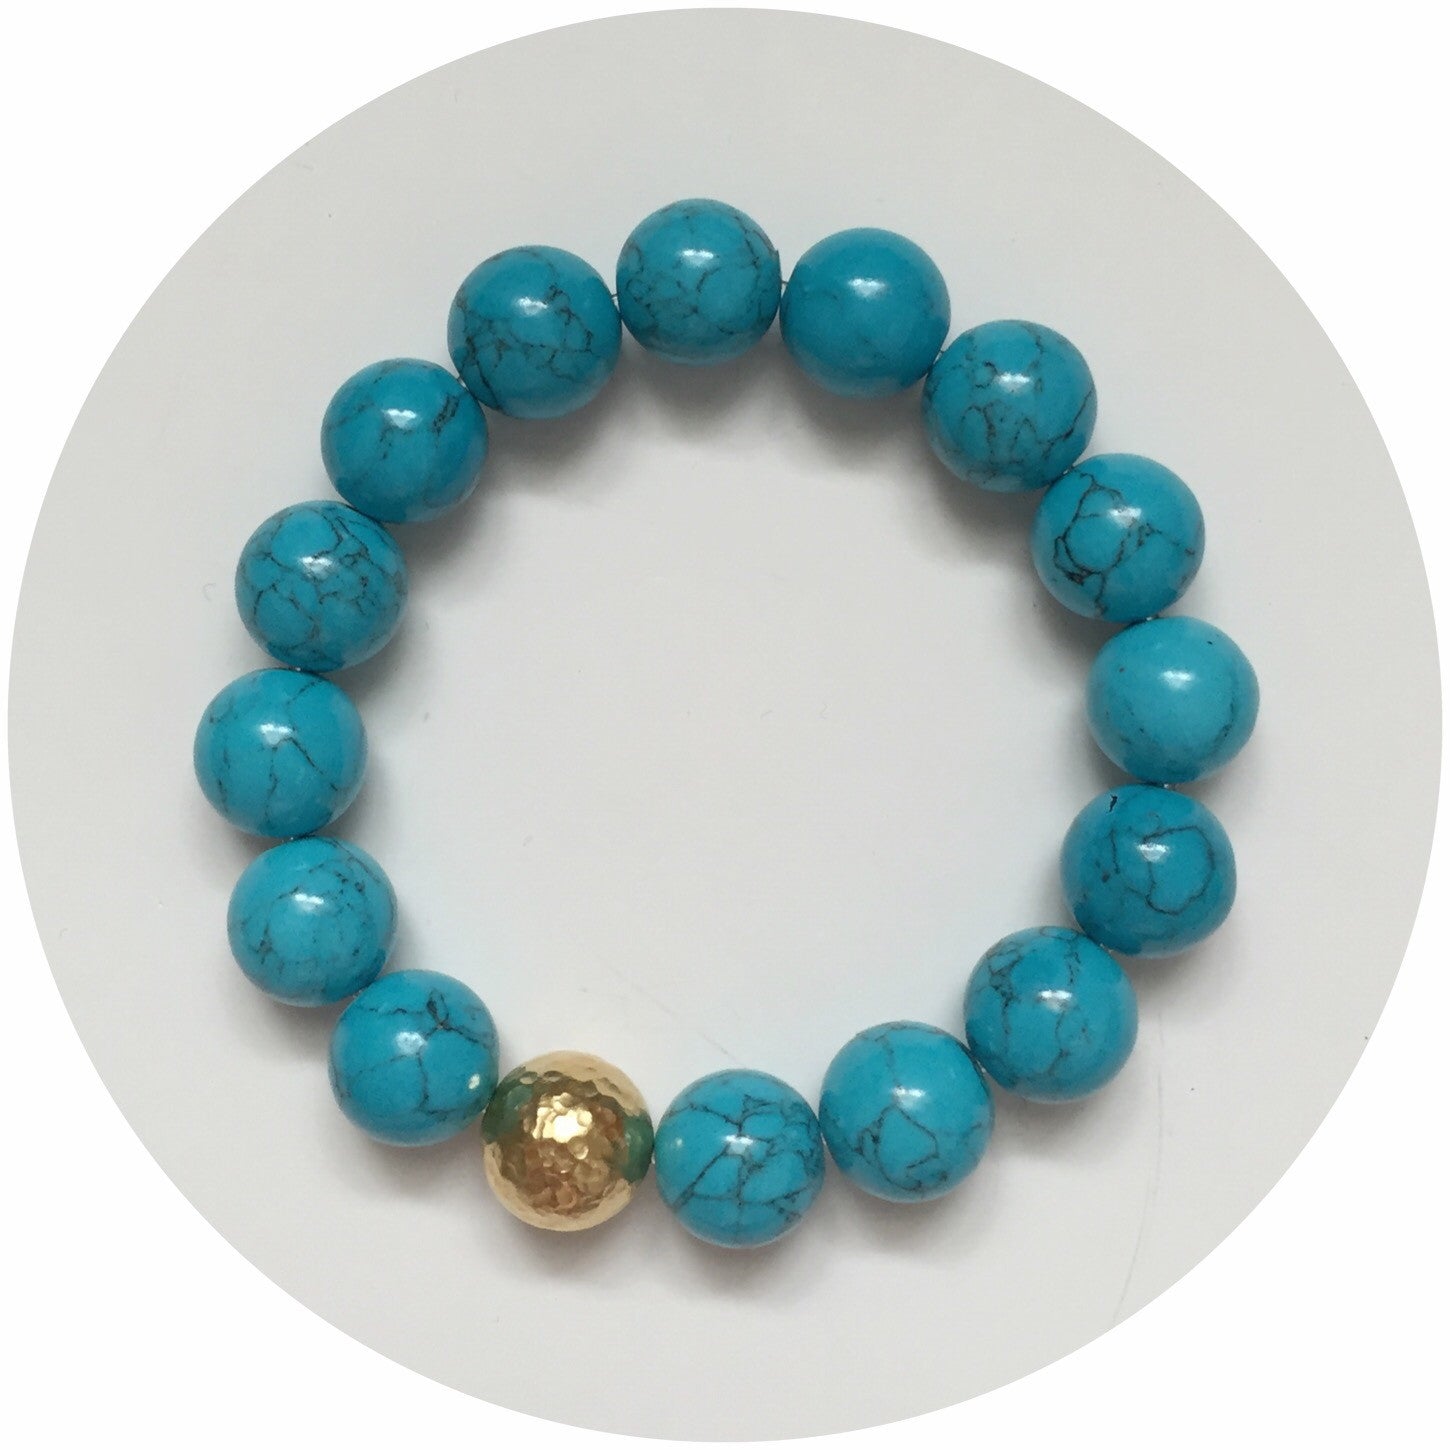 Blue Howlite with Gold Hammered Accent - Oriana Lamarca LLC